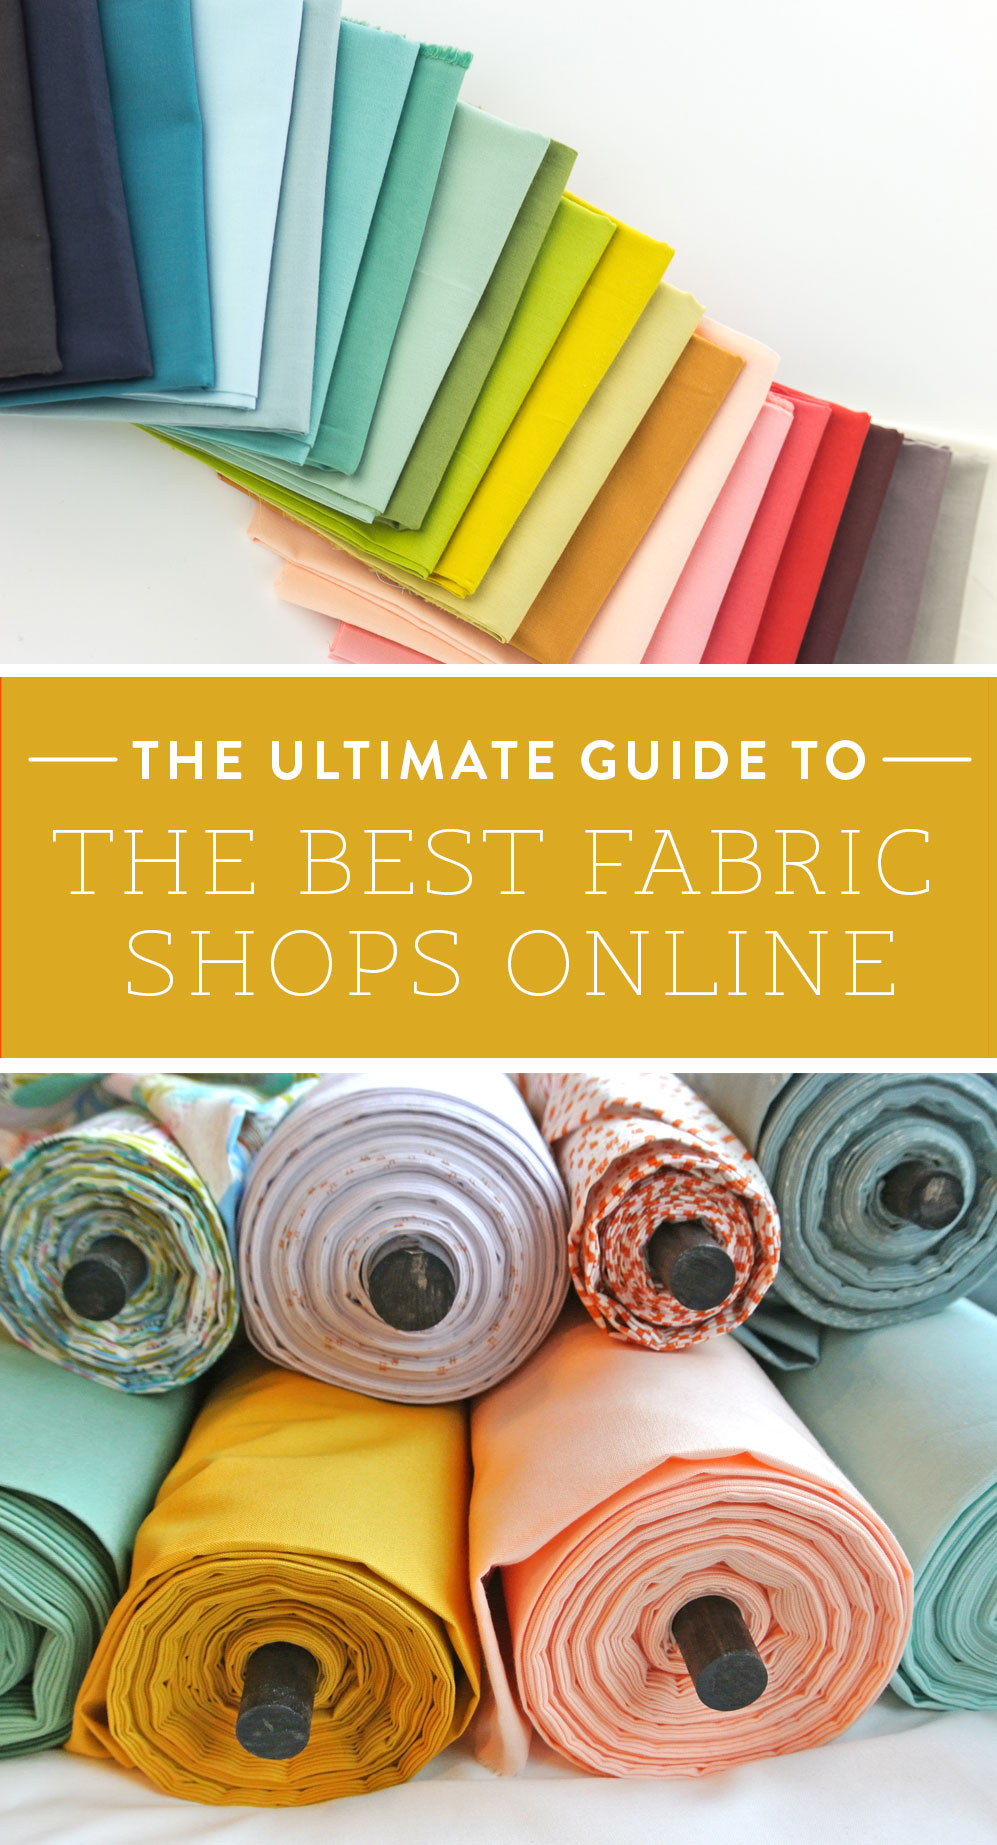 The 10 Best Places to Buy Fabric Online